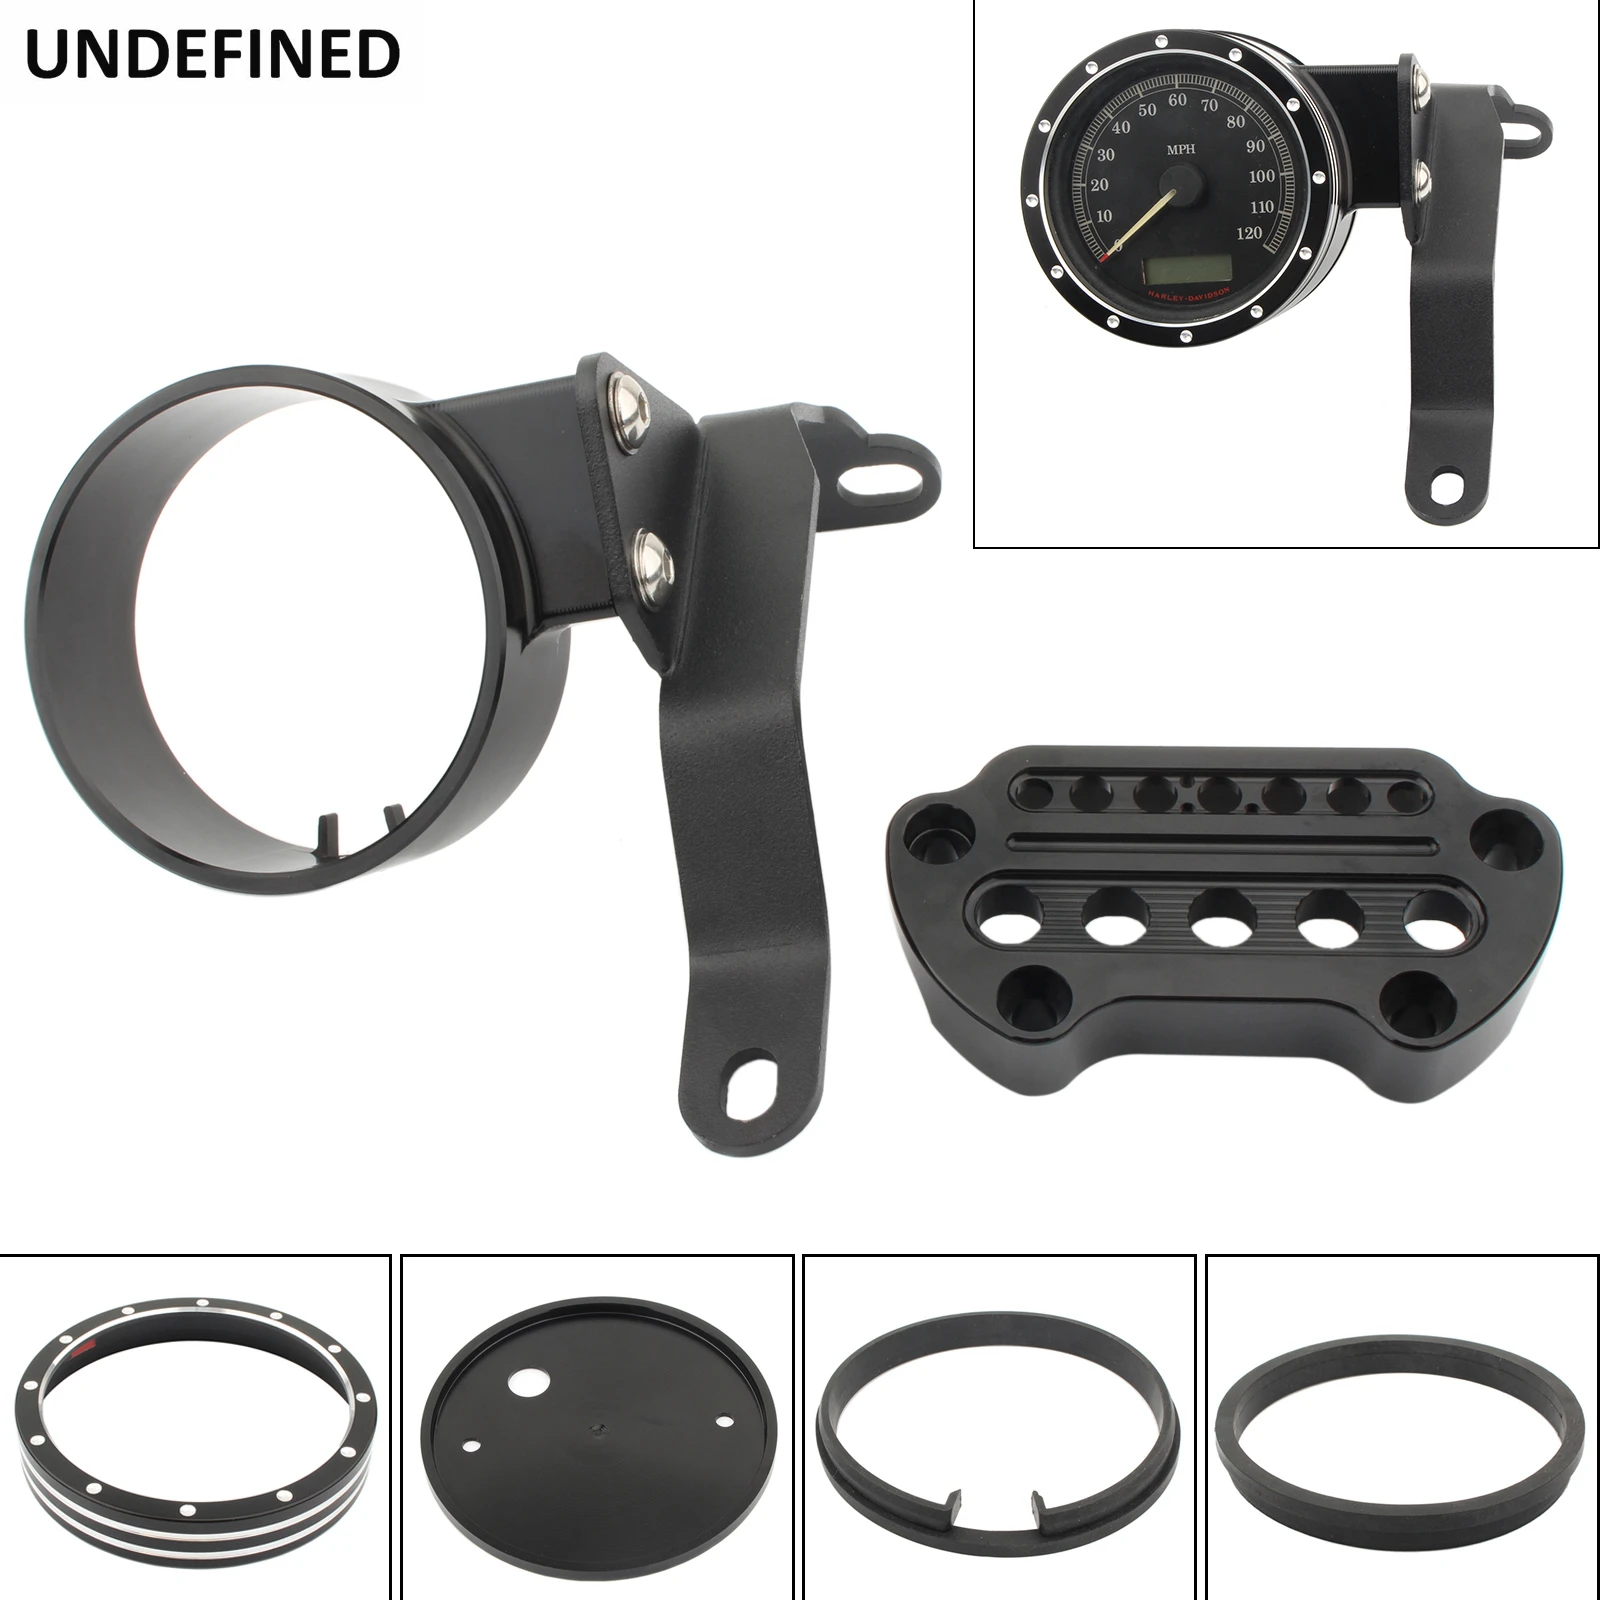 

Motorcycle Instrument Speedometer Relocation Bracket Kit Case Housing Side Mount Cover For Harley Sportster 883 XL883 2004-2020